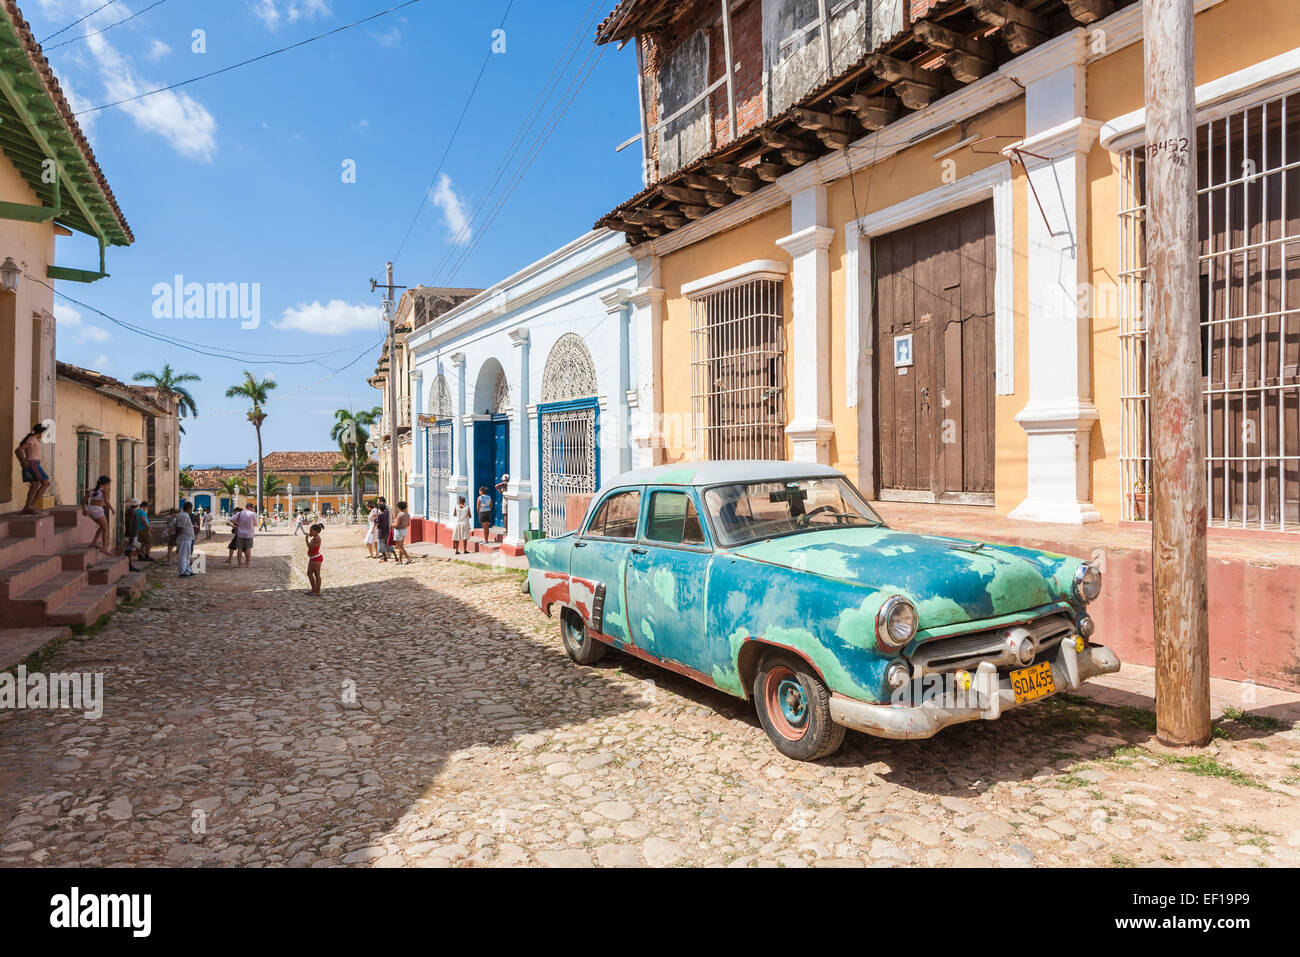 View of typical battered, old, rusty green vintage American car parked in a cobbled street in downtown Trinidad, Cuba on a sunny day with blue sky Stock Photo